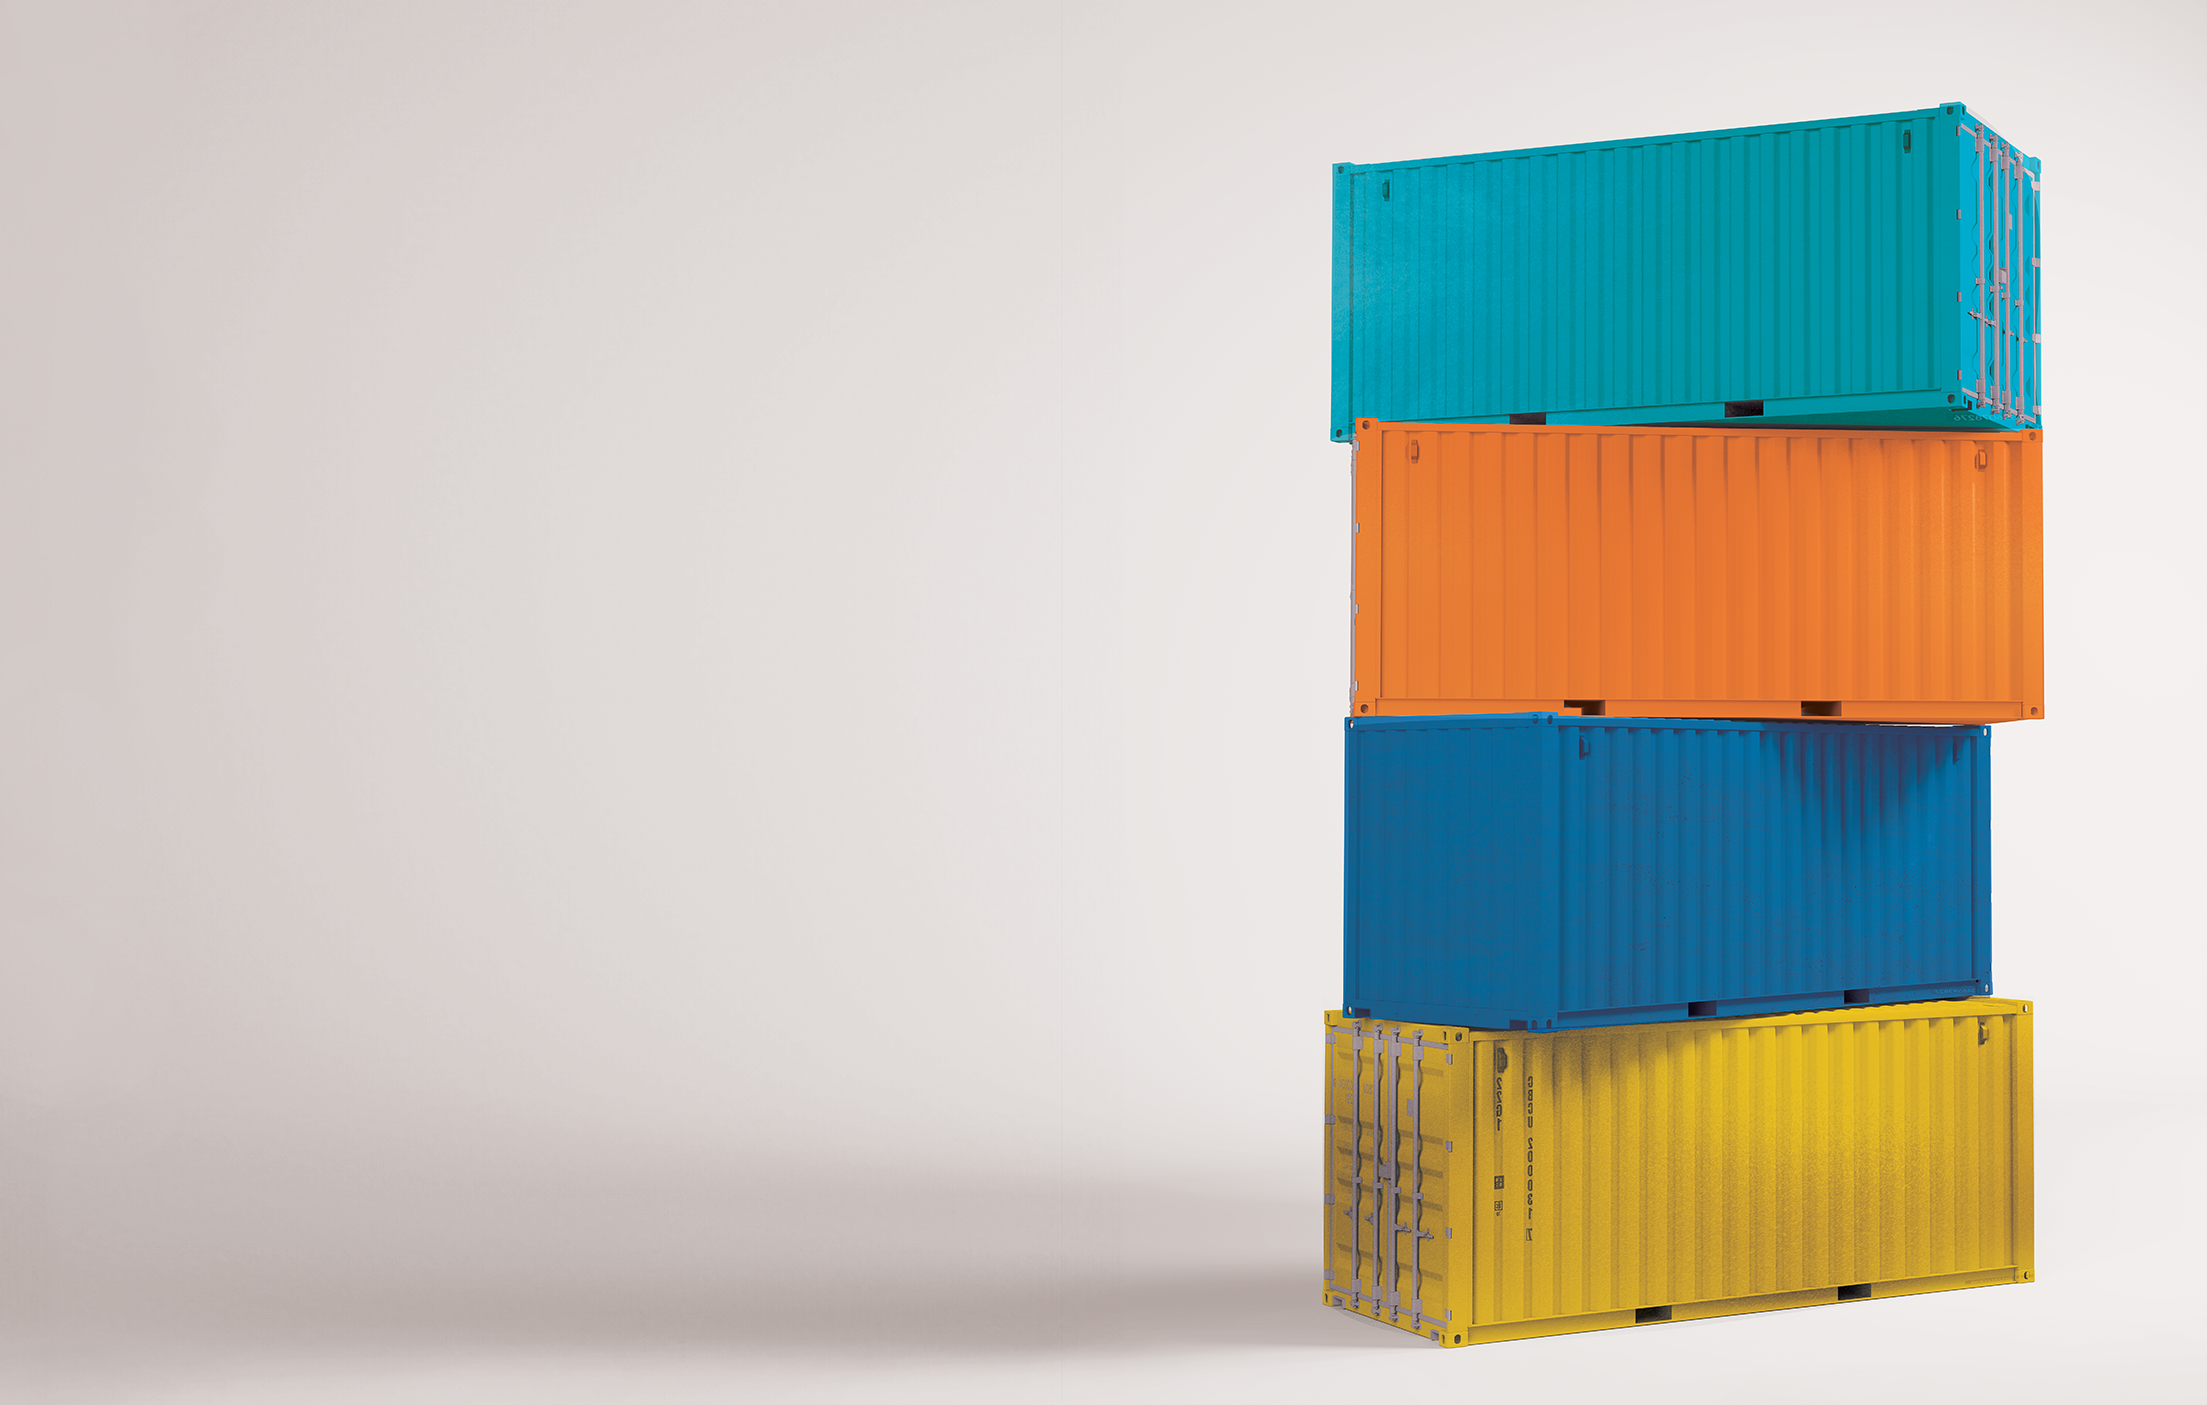 Four shipping containers sit stacked on top each other